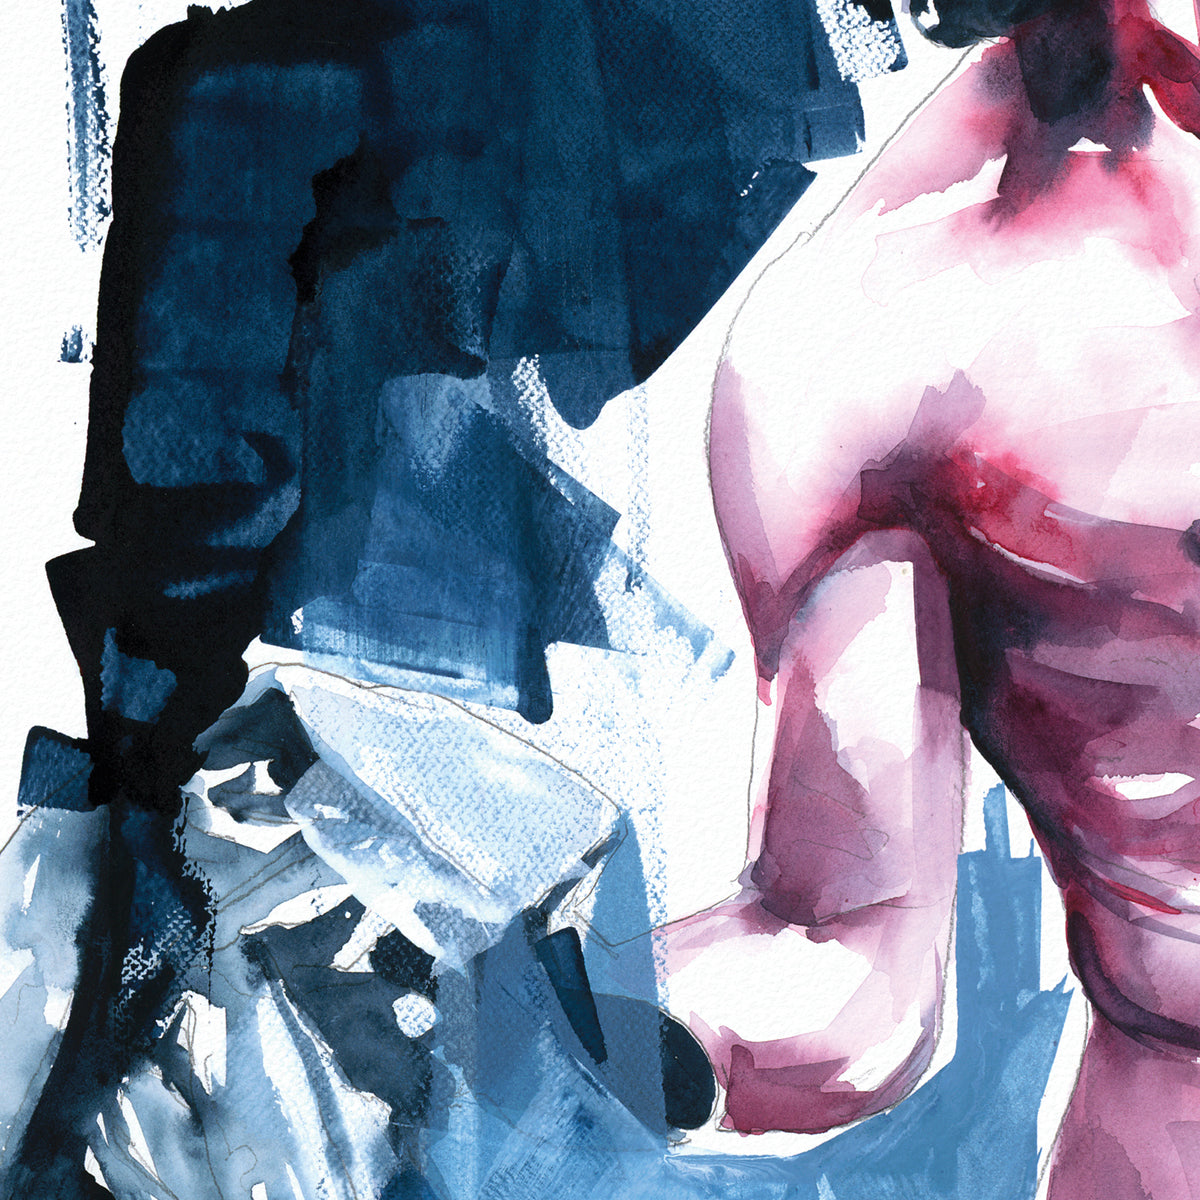 Full Nude Man Reaching Back and Telling his Story - Giclee Art Print